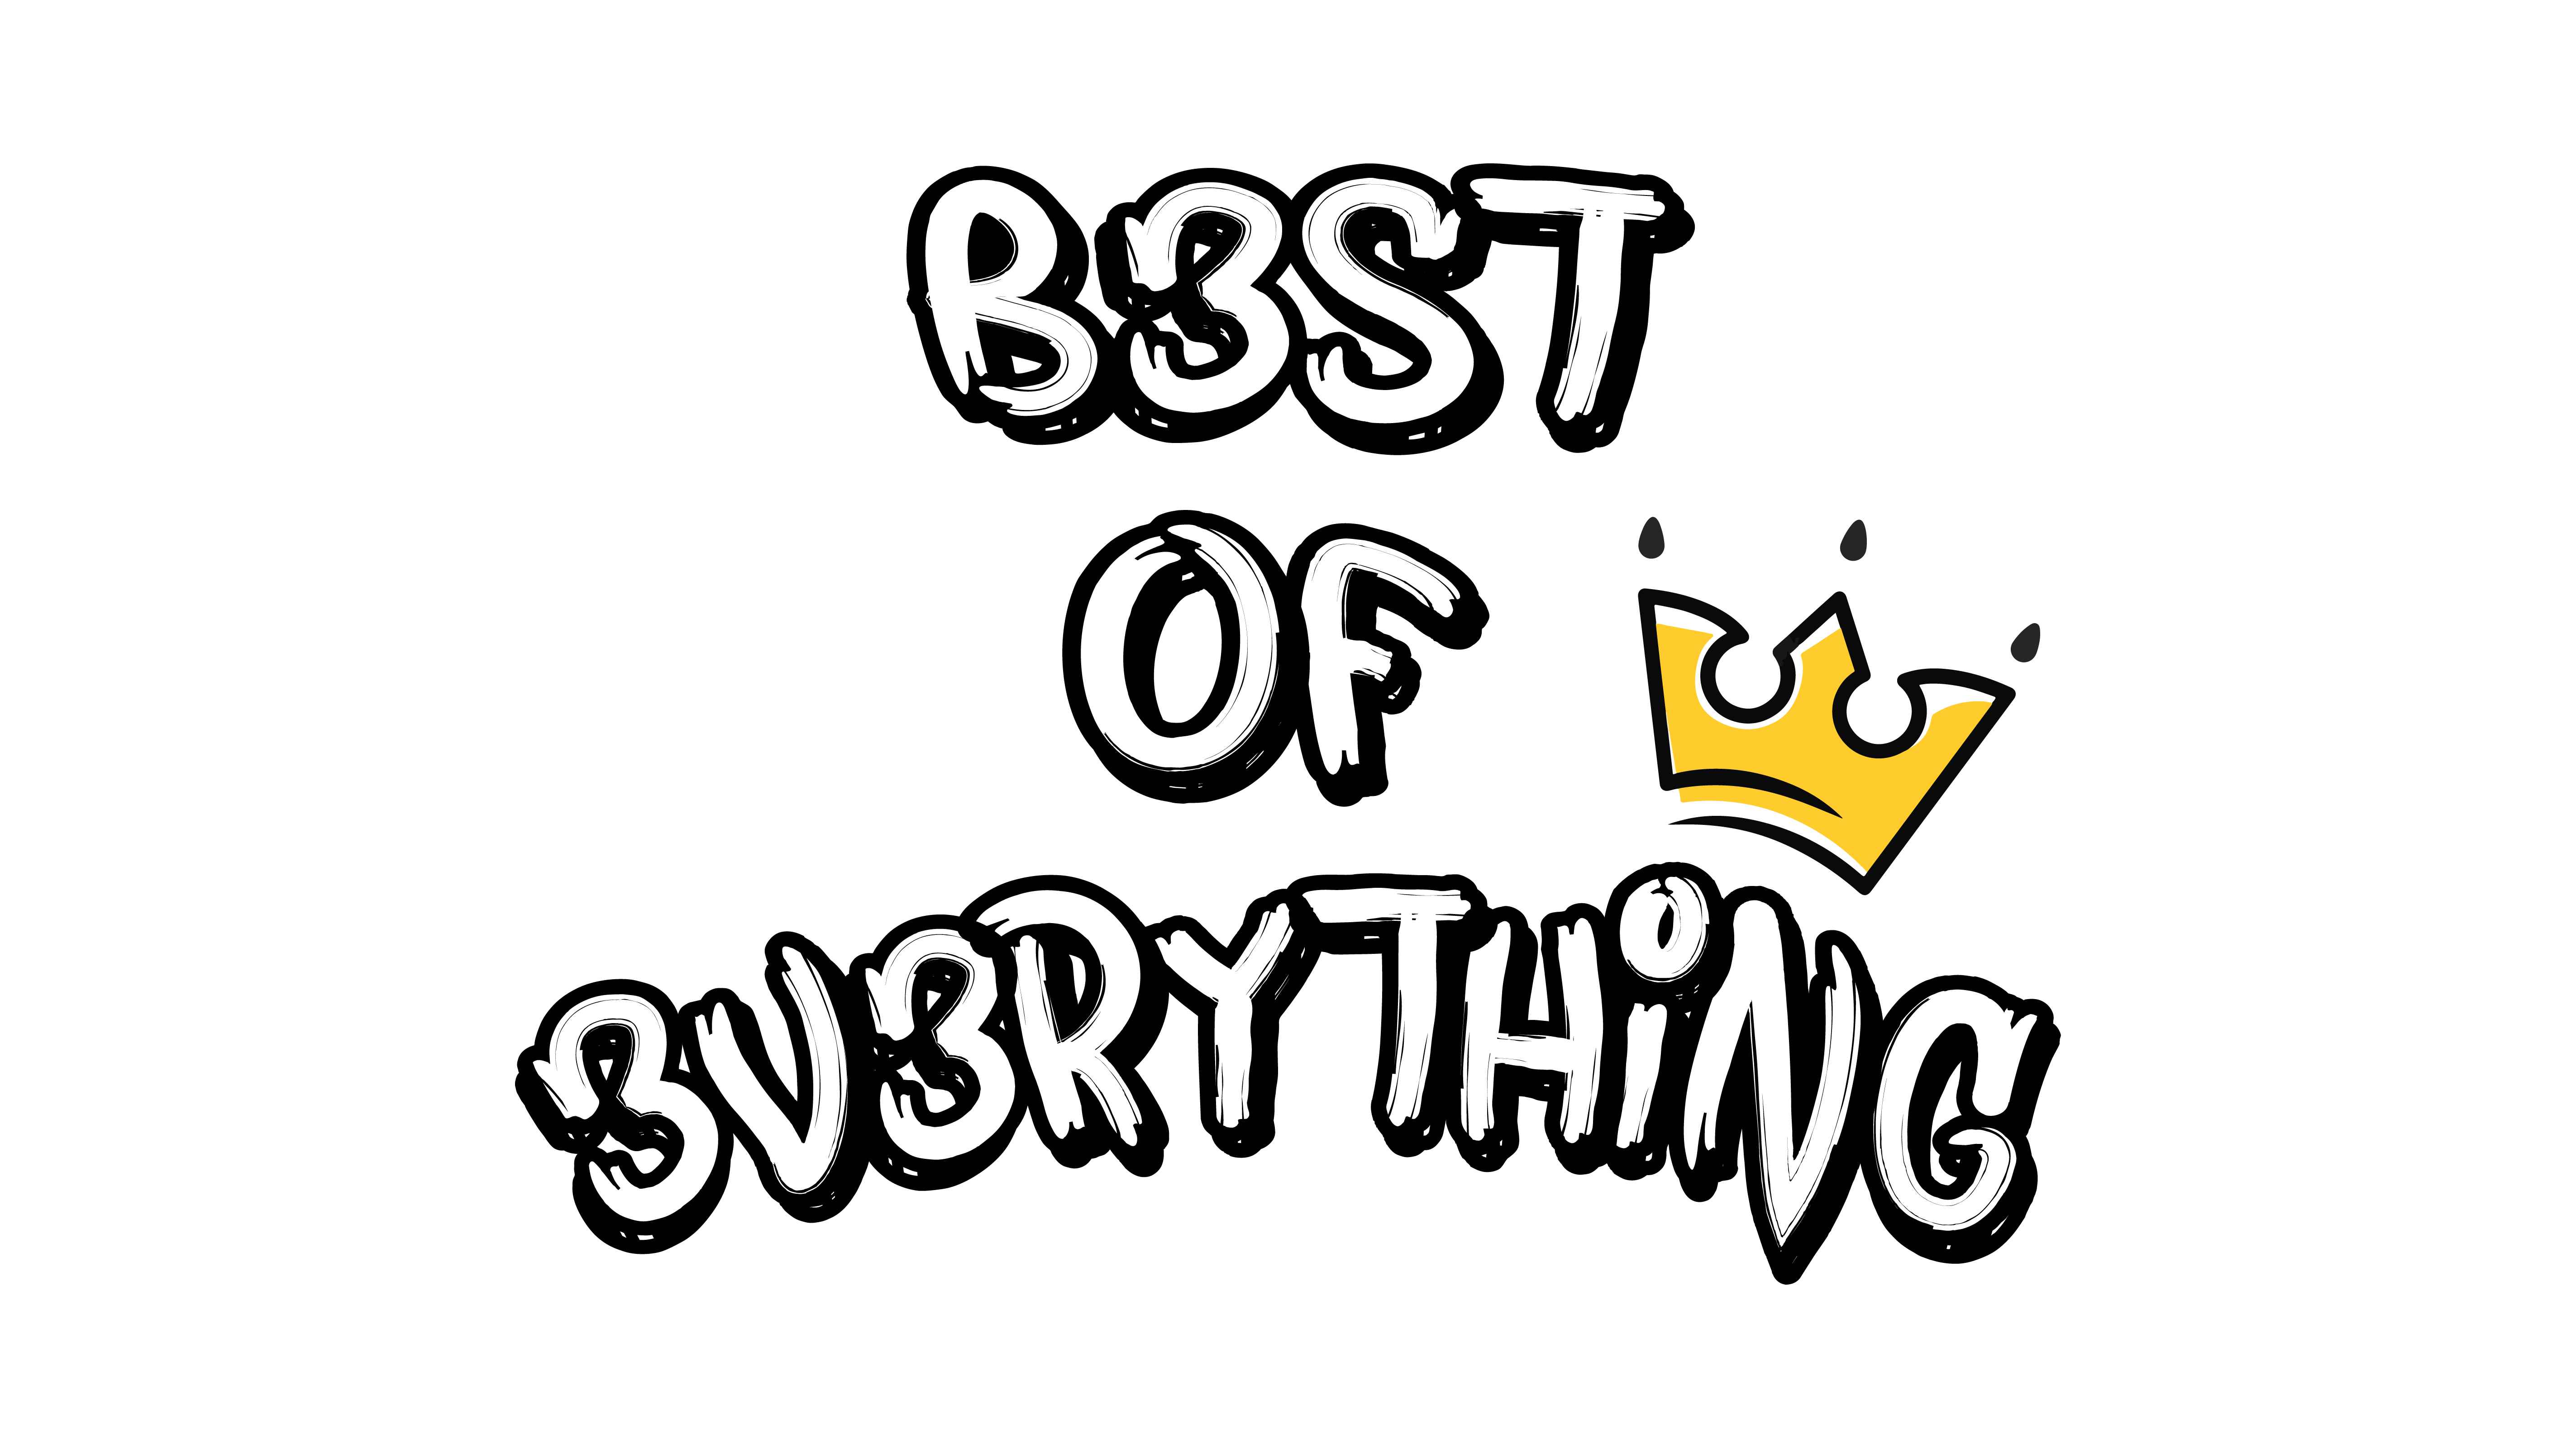 Best Of Everything